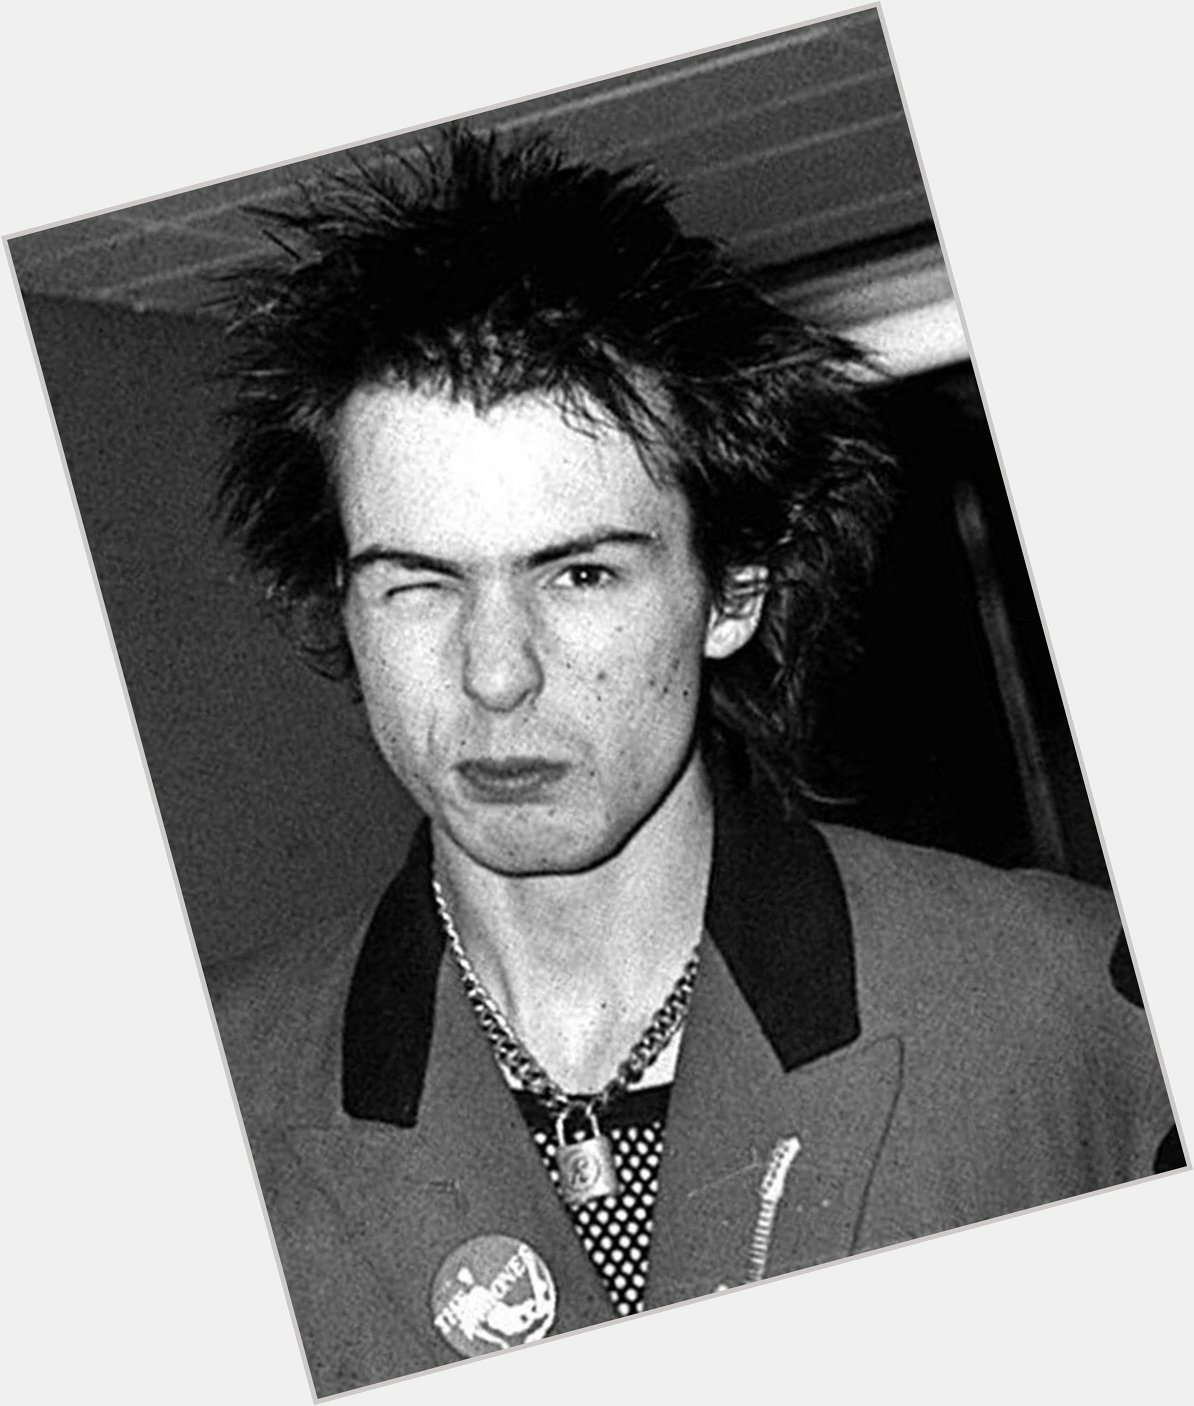 Happy birthday sid vicious I hope you and Nancy have reunited in the afterlife R.I.P 